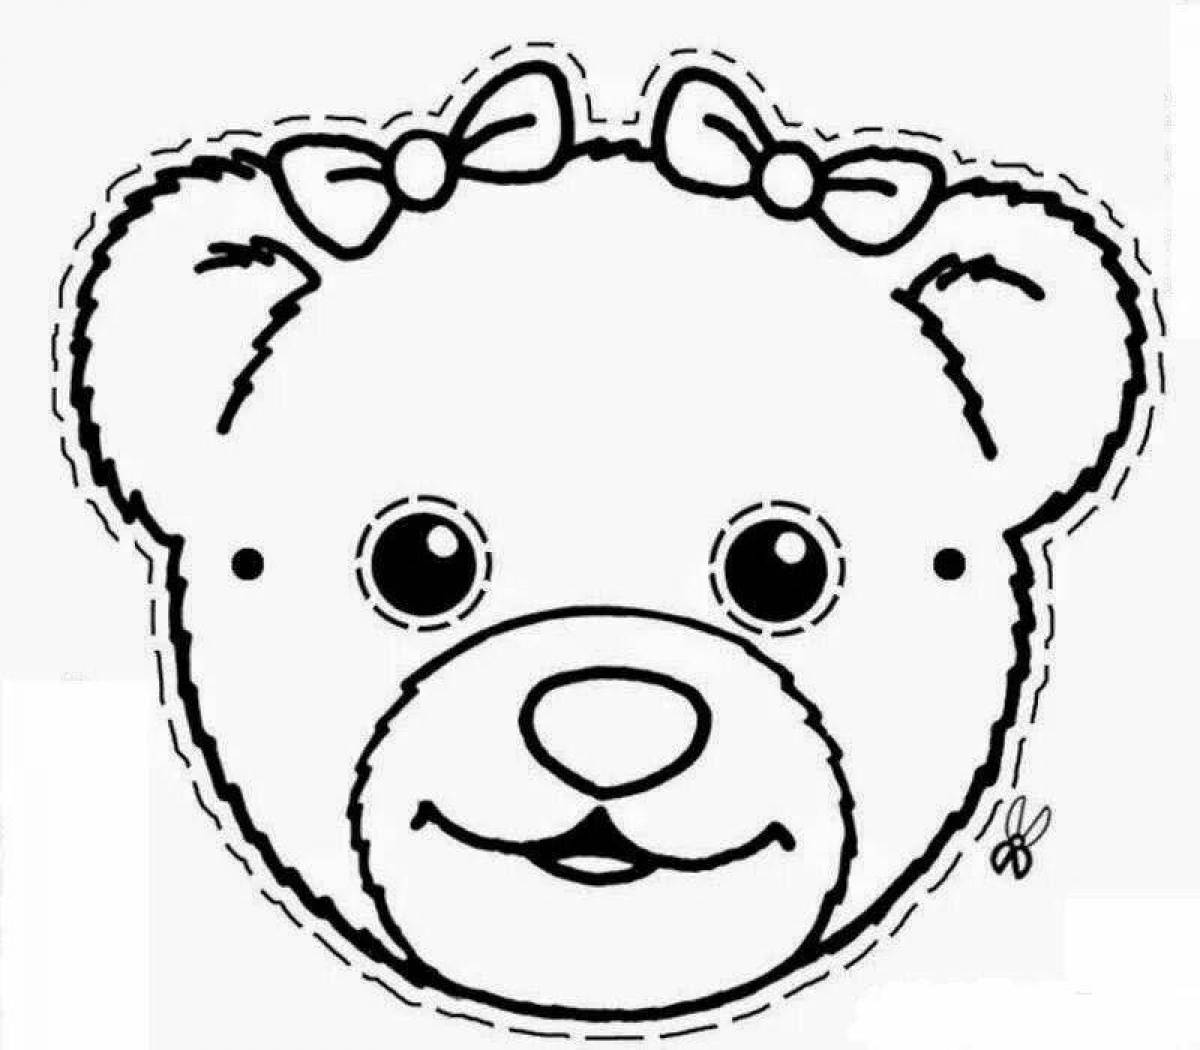 Awesome bear head coloring page